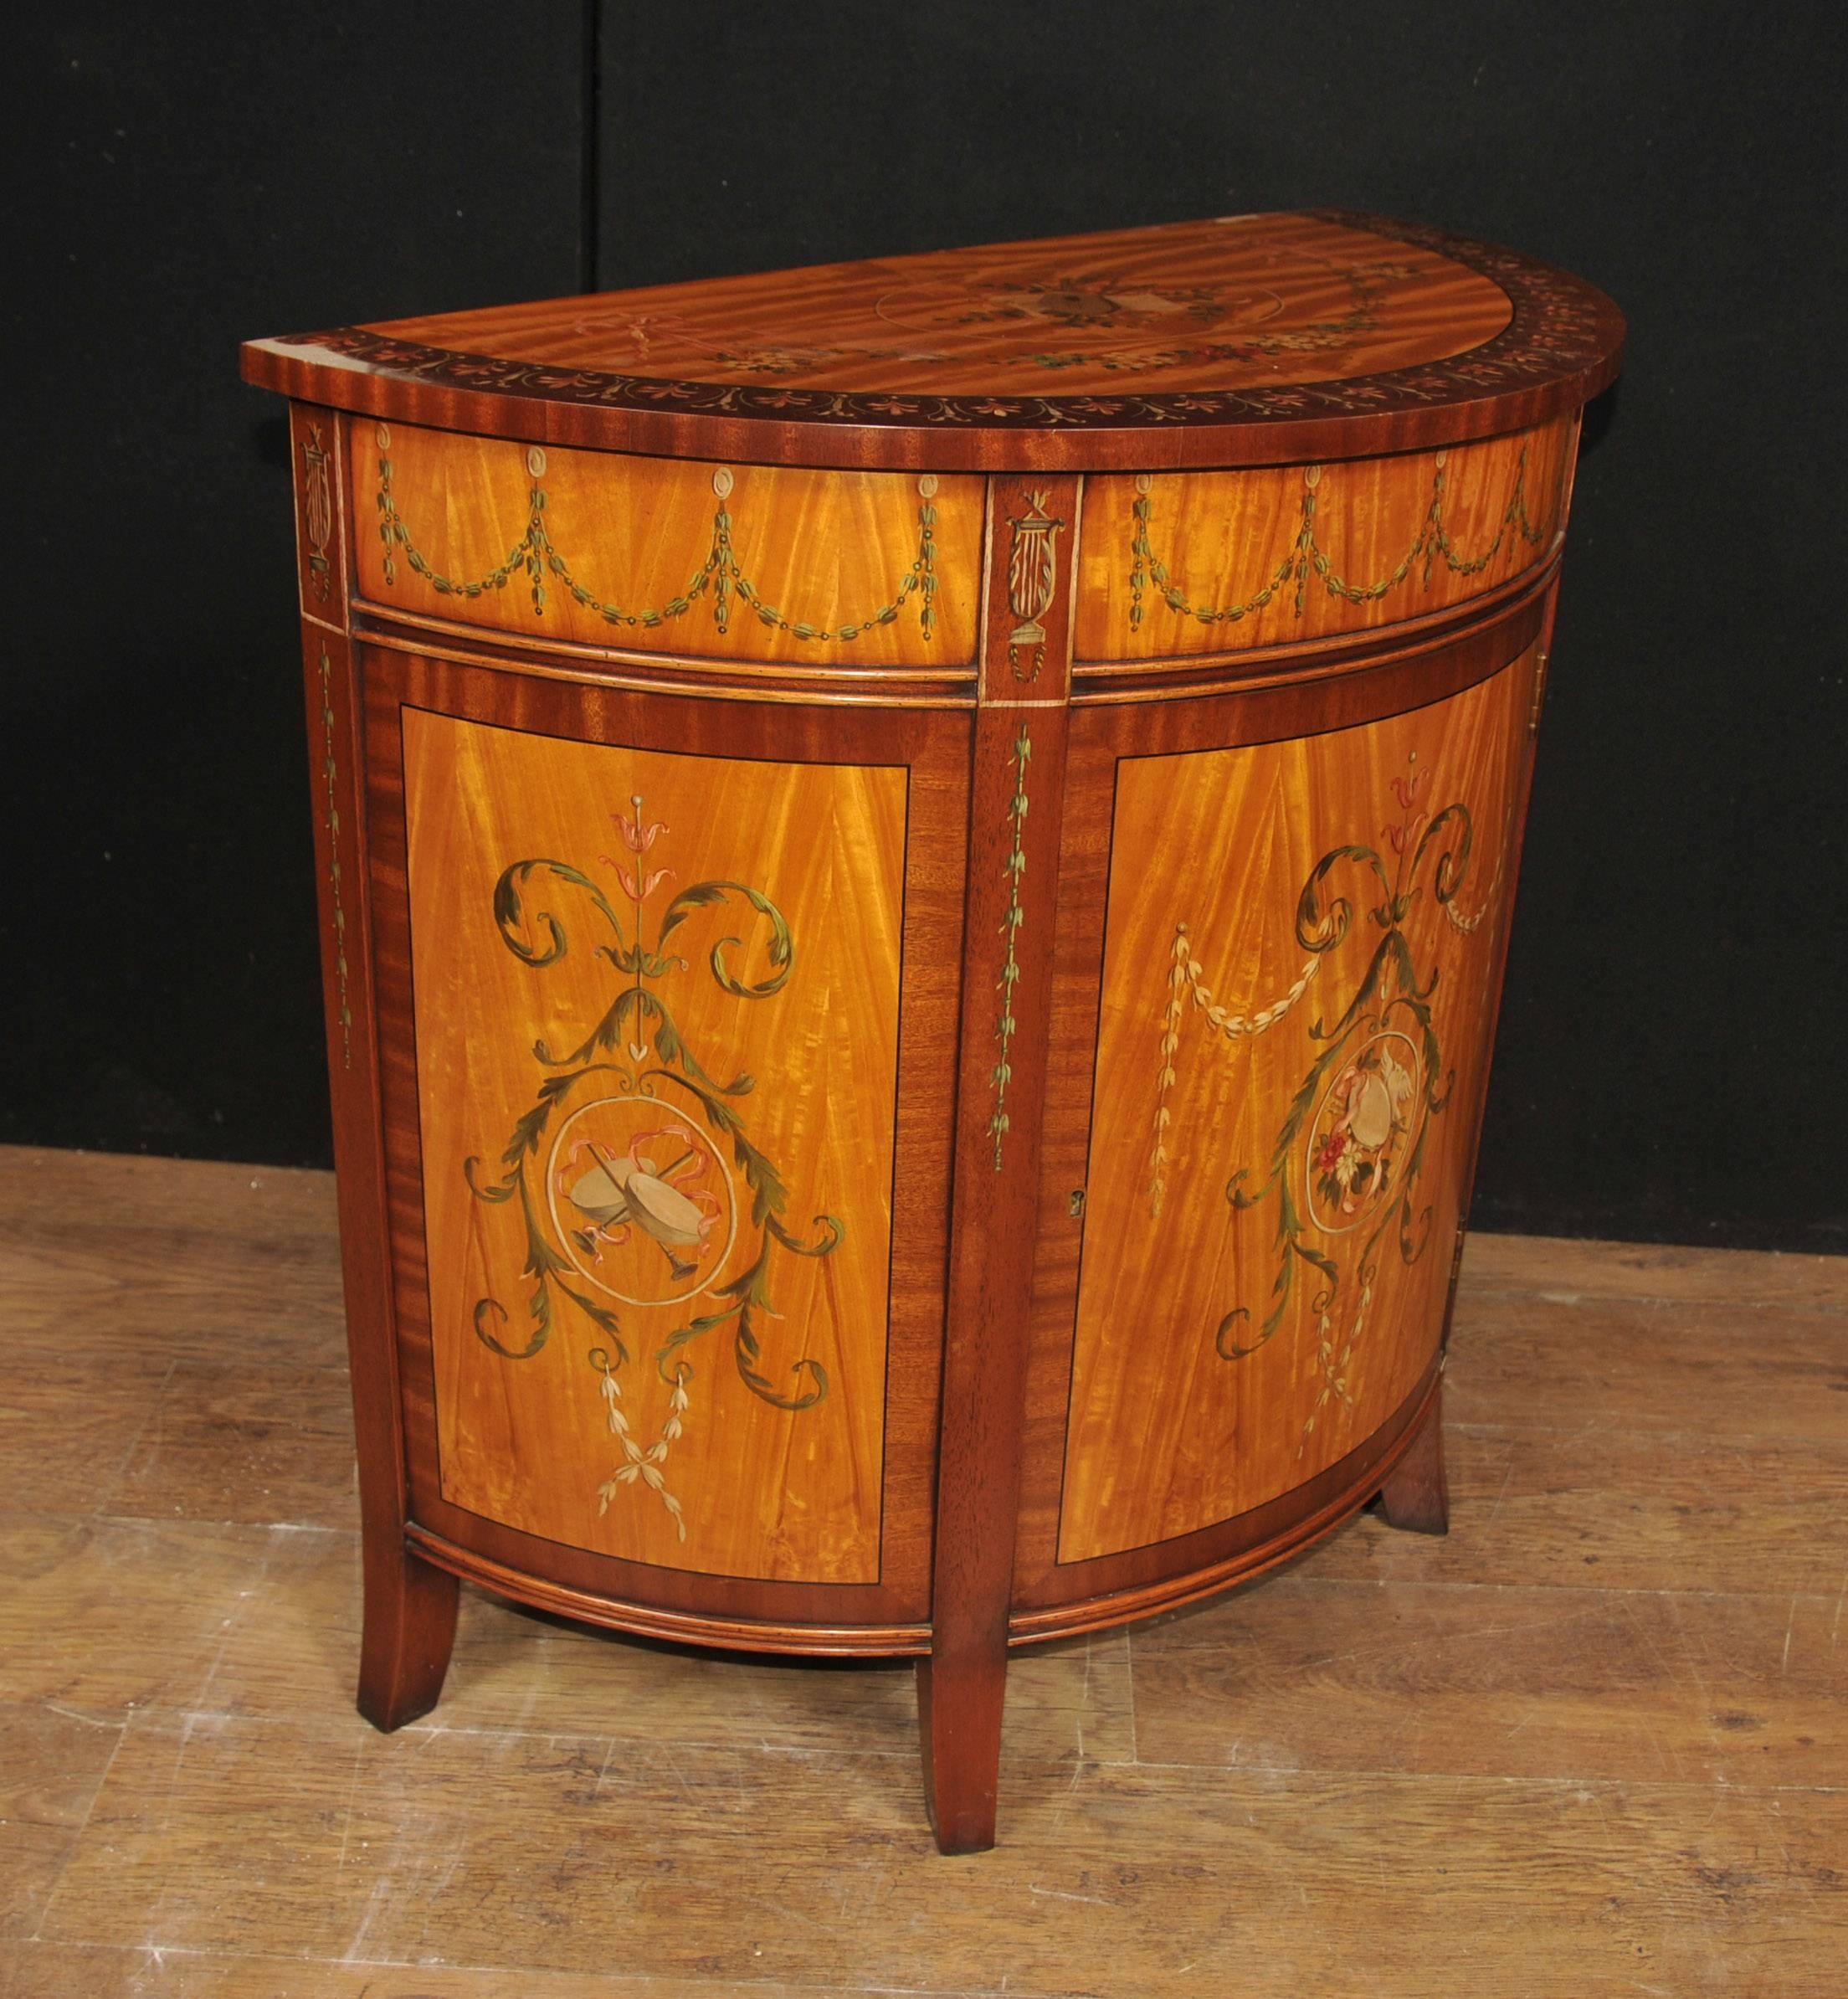 Sheraton Style Painted Demilune Cabinet Regency Satinwood Furniture In Good Condition For Sale In Potters Bar, Herts